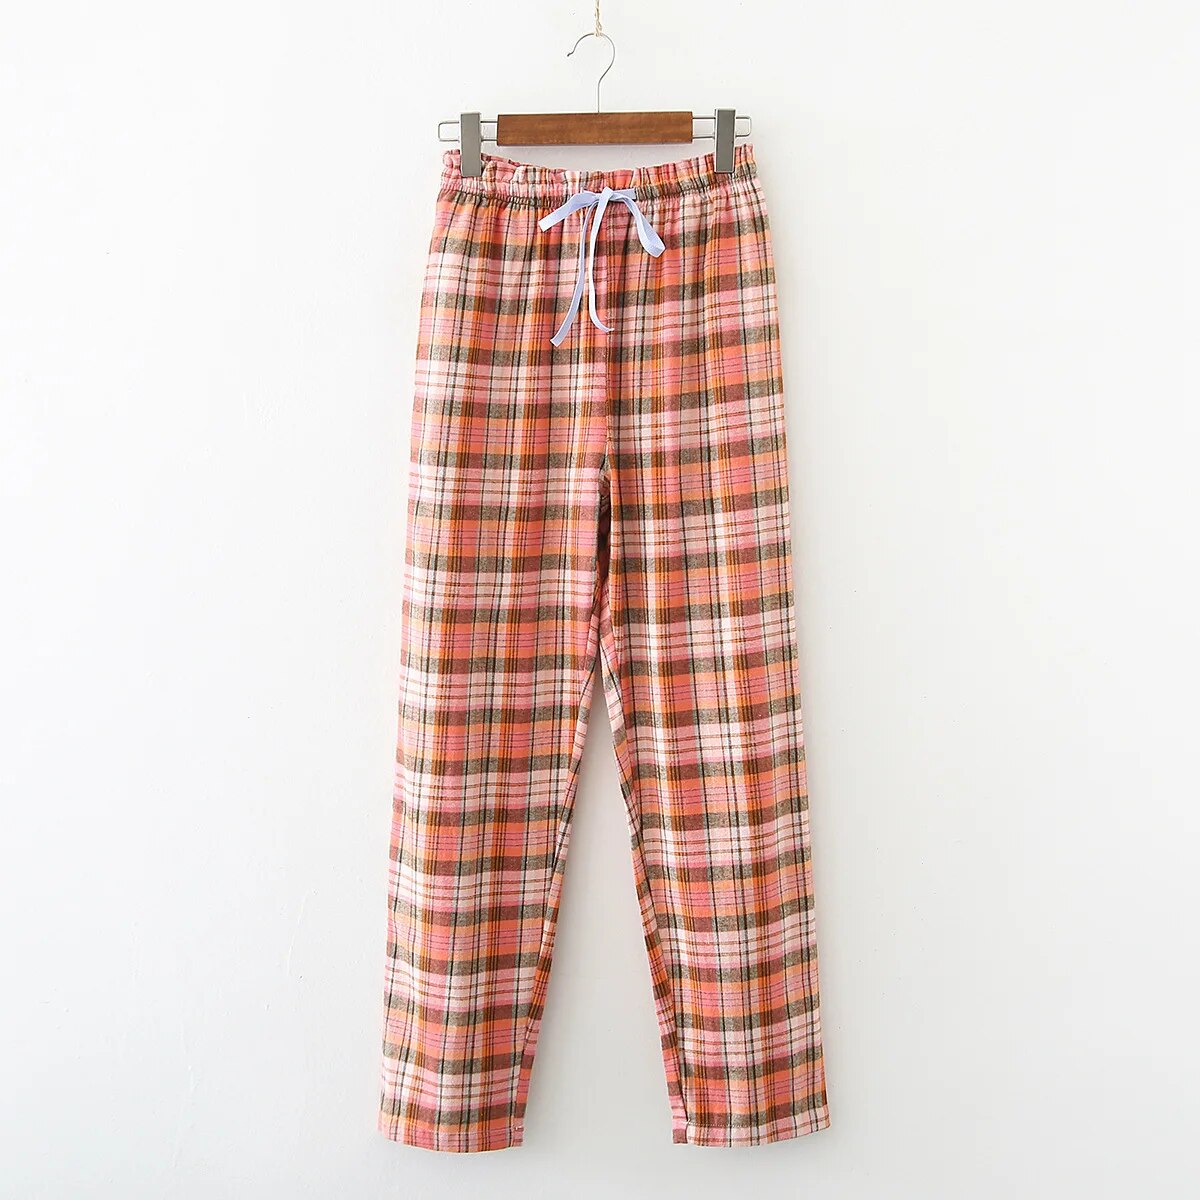 Apple Harvest 100% Cotton Lounge Pants | Hypoallergenic - Allergy Friendly - Naturally Free